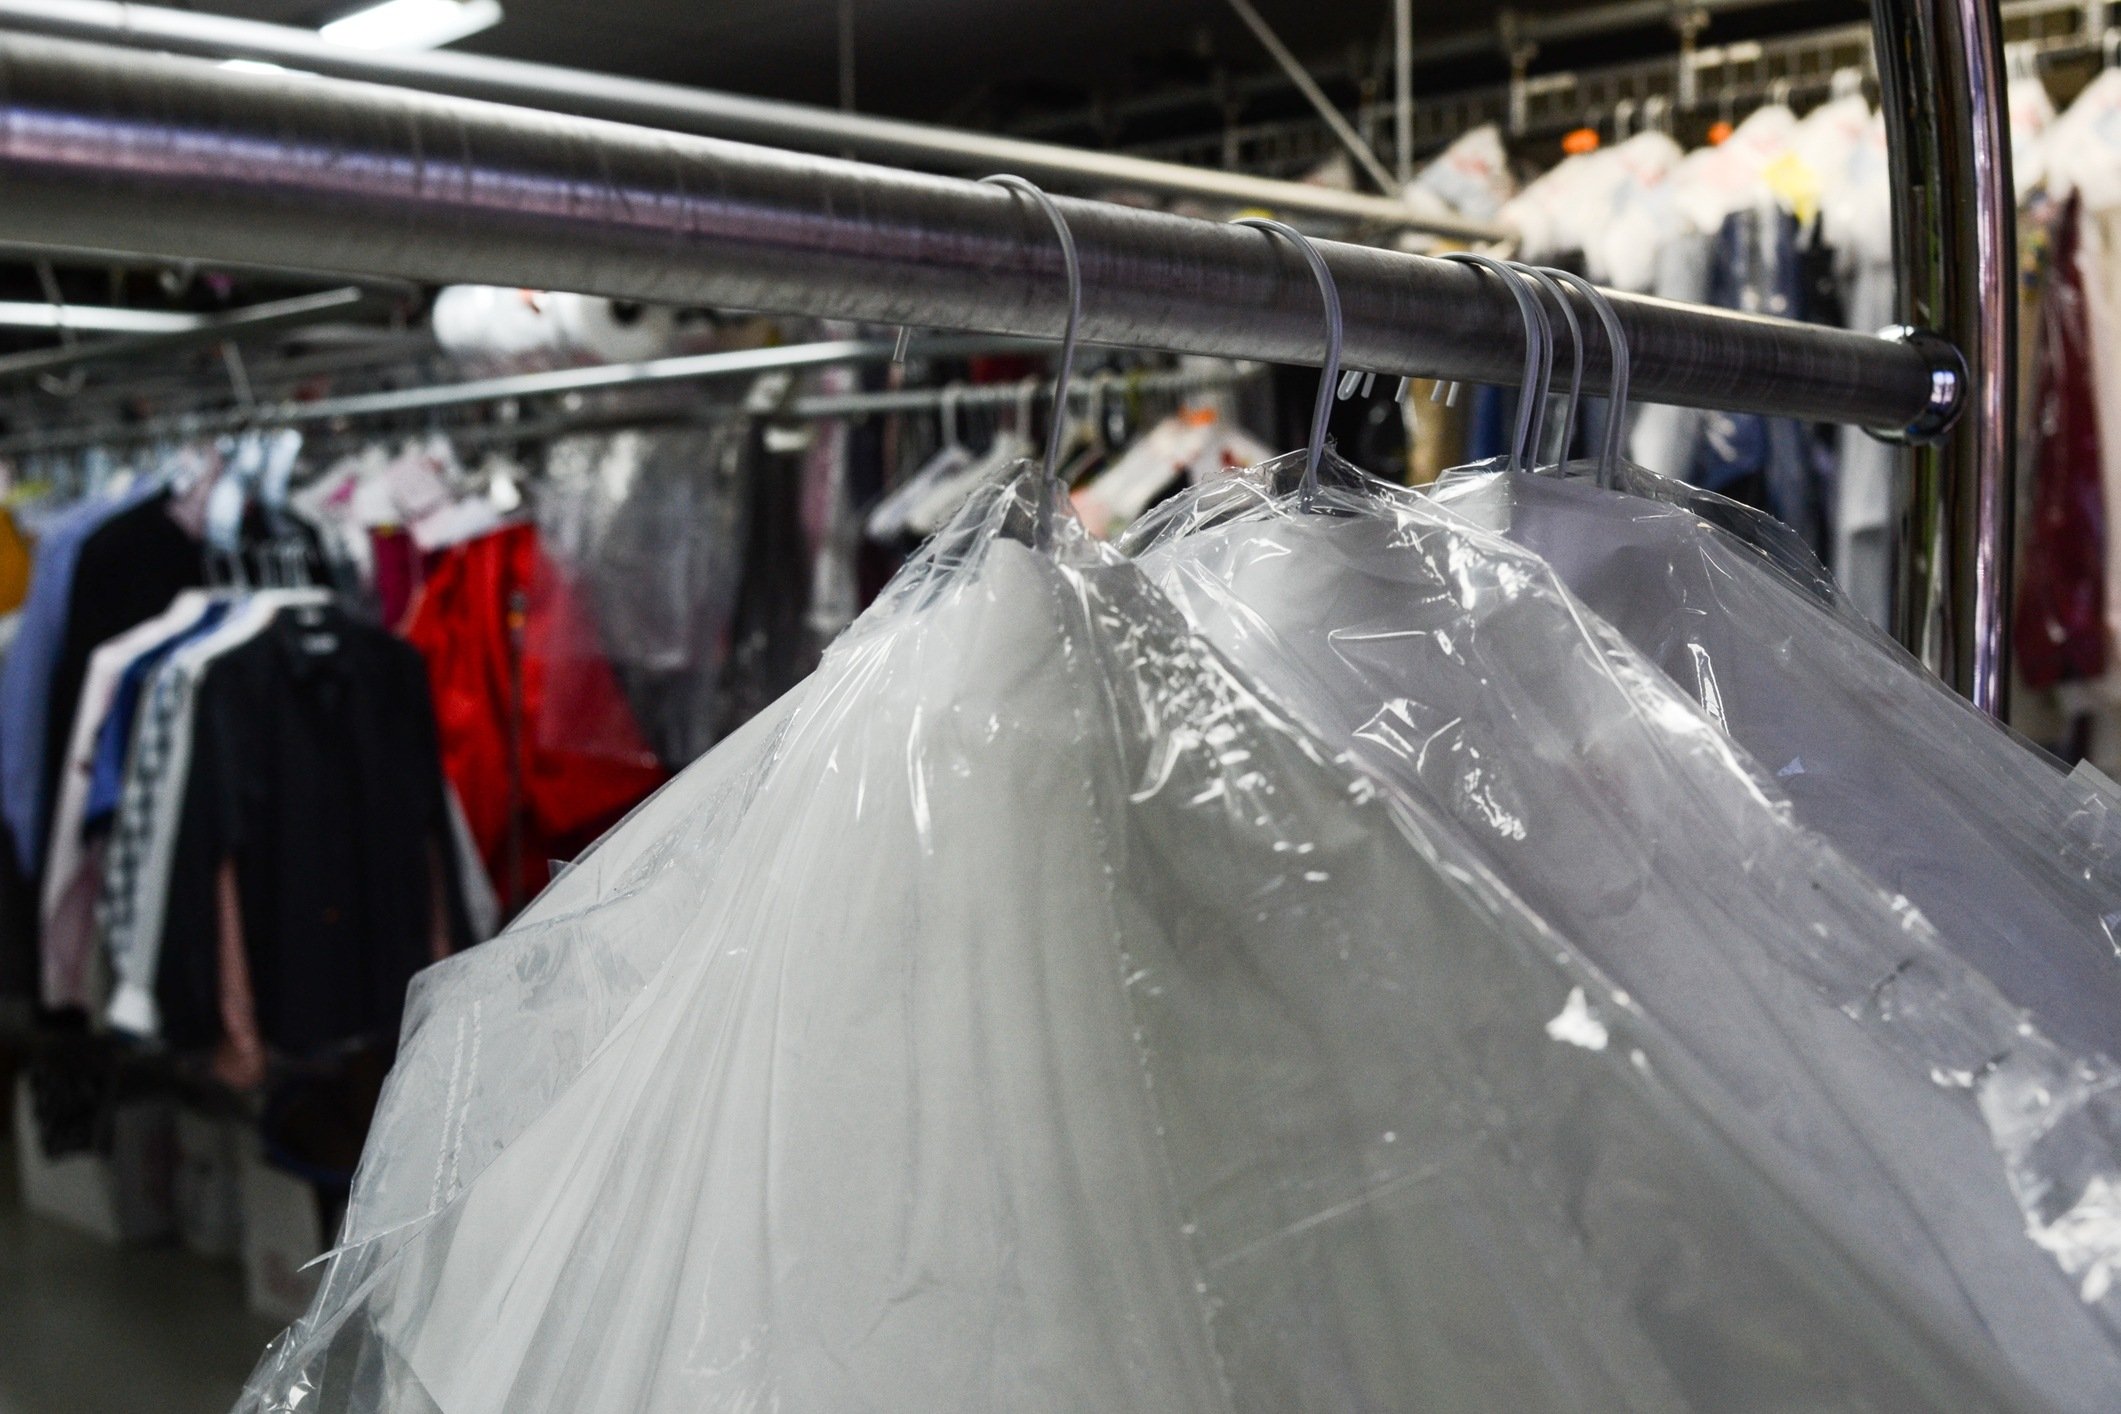 Dry cleaned clothes in plastic with business in back